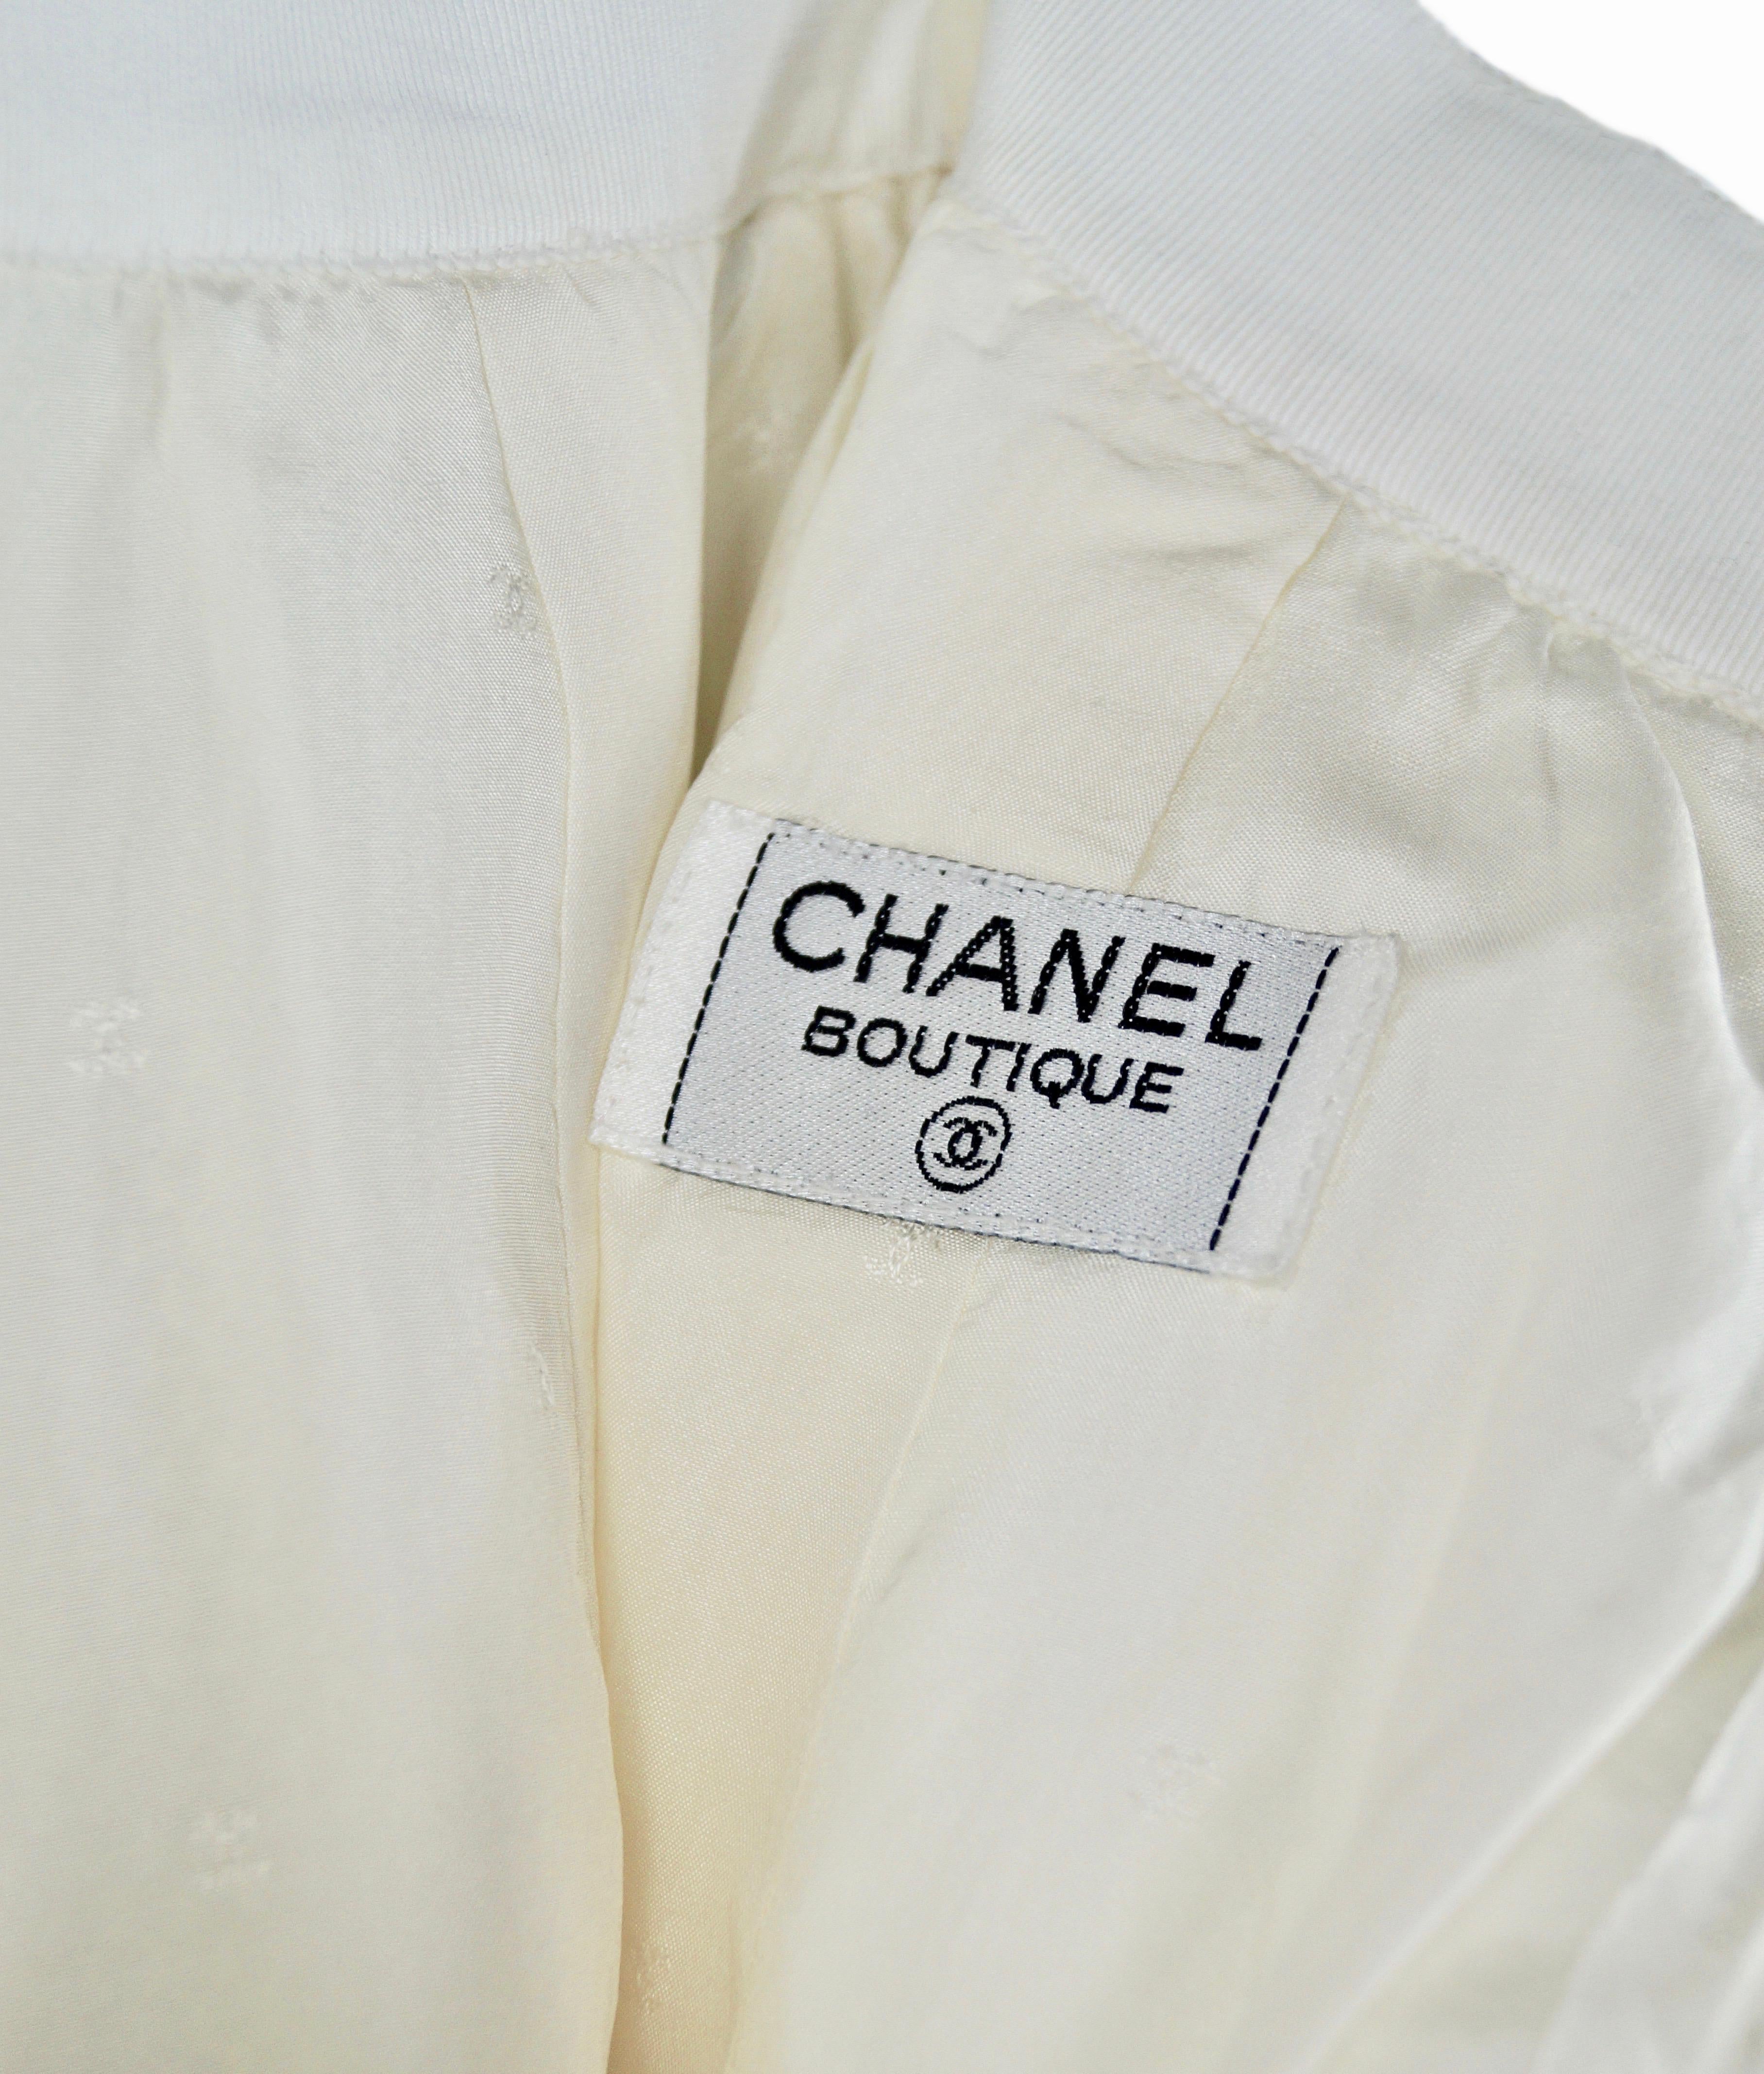 CHANEL boutique Suit white cotton jacket and skirt  late 80s For Sale 3